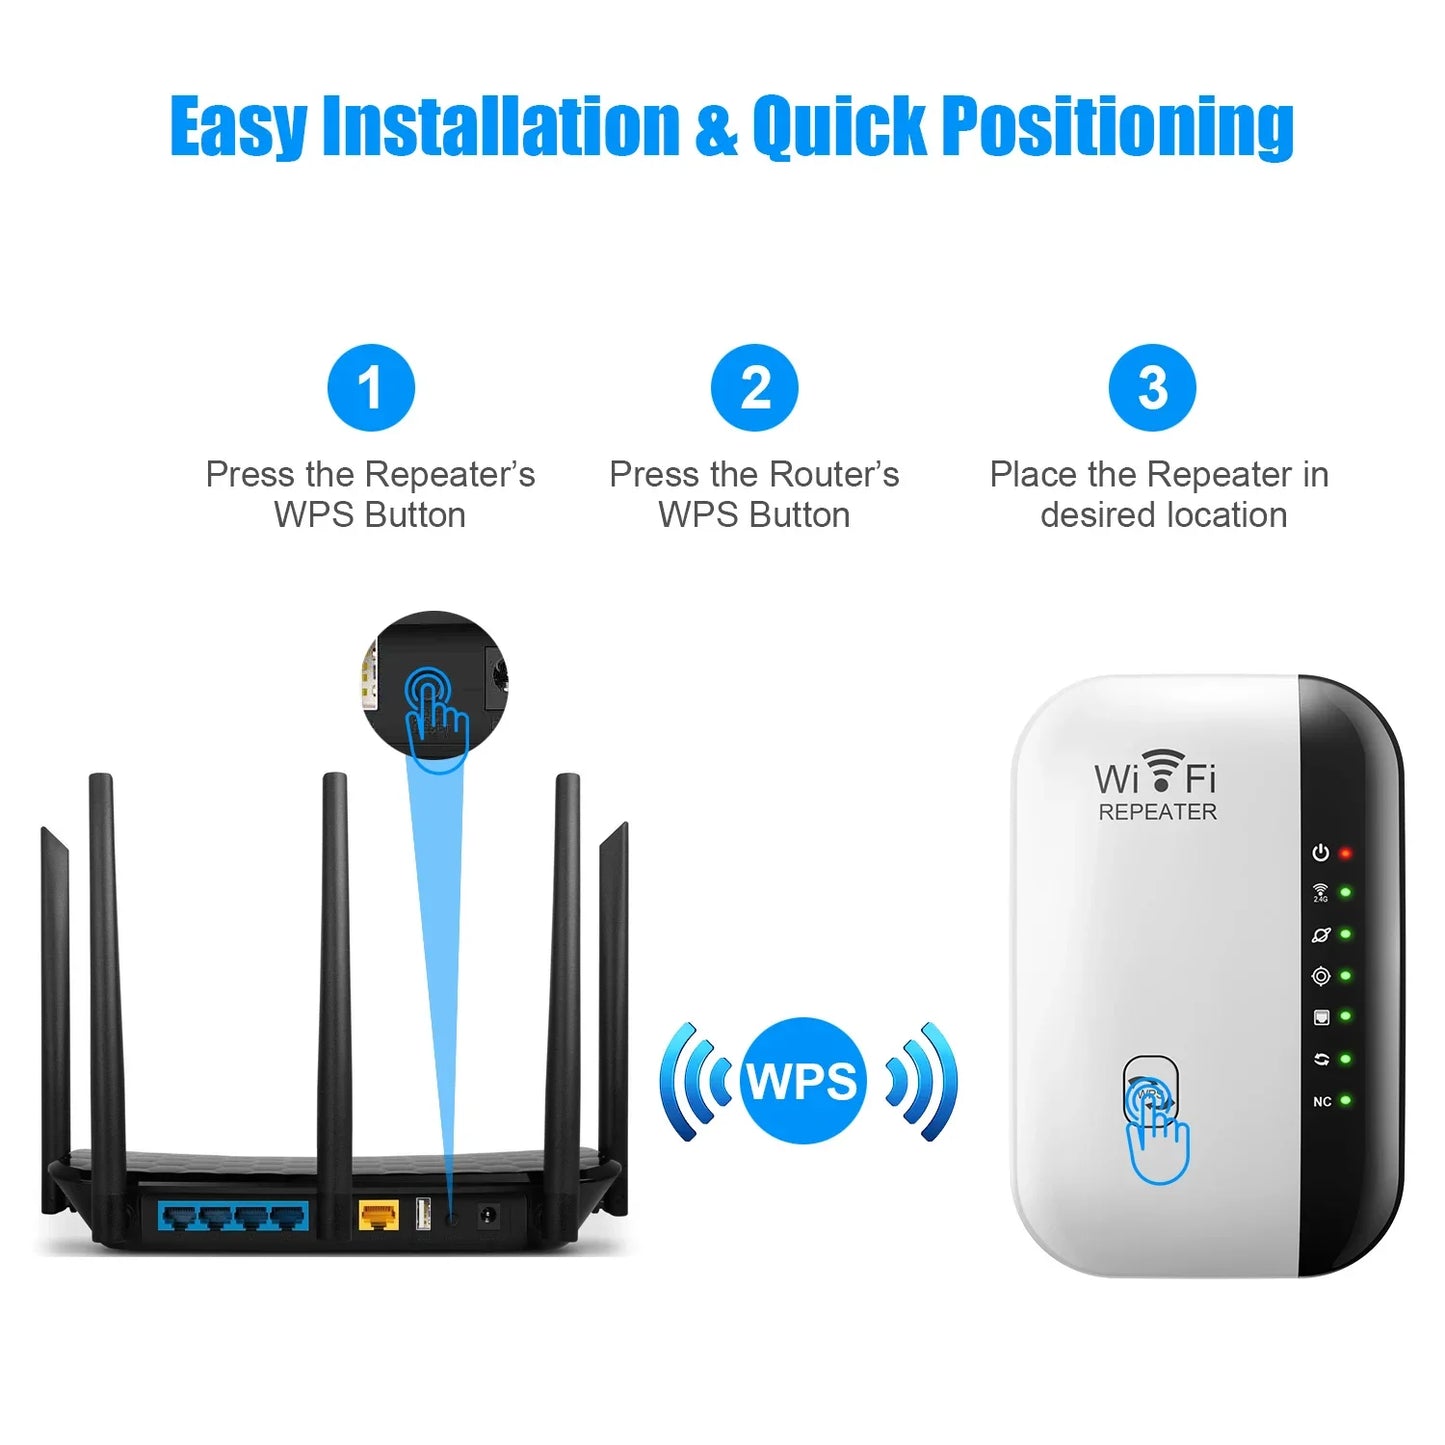 Wireless Wifi Repeater 300Mbps Wifi Extender Amplifier Booster Router 802.11N WPS Long Range 7 Status Light Wifi Repeater for PC